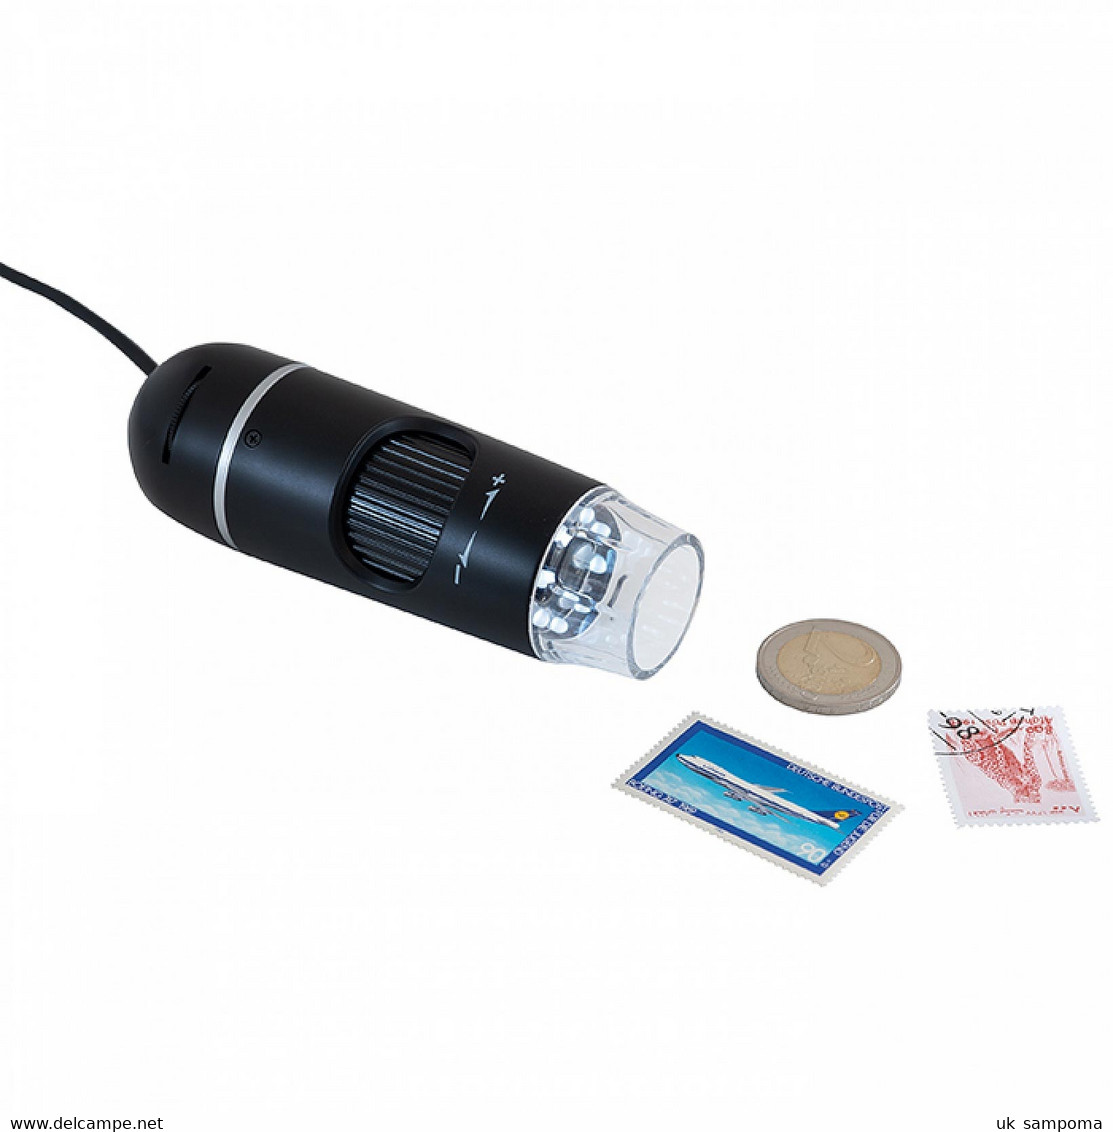 USB Digital Microscope DM6, Features A 10x To 300x Magnification - Stamp Tongs, Magnifiers And Microscopes